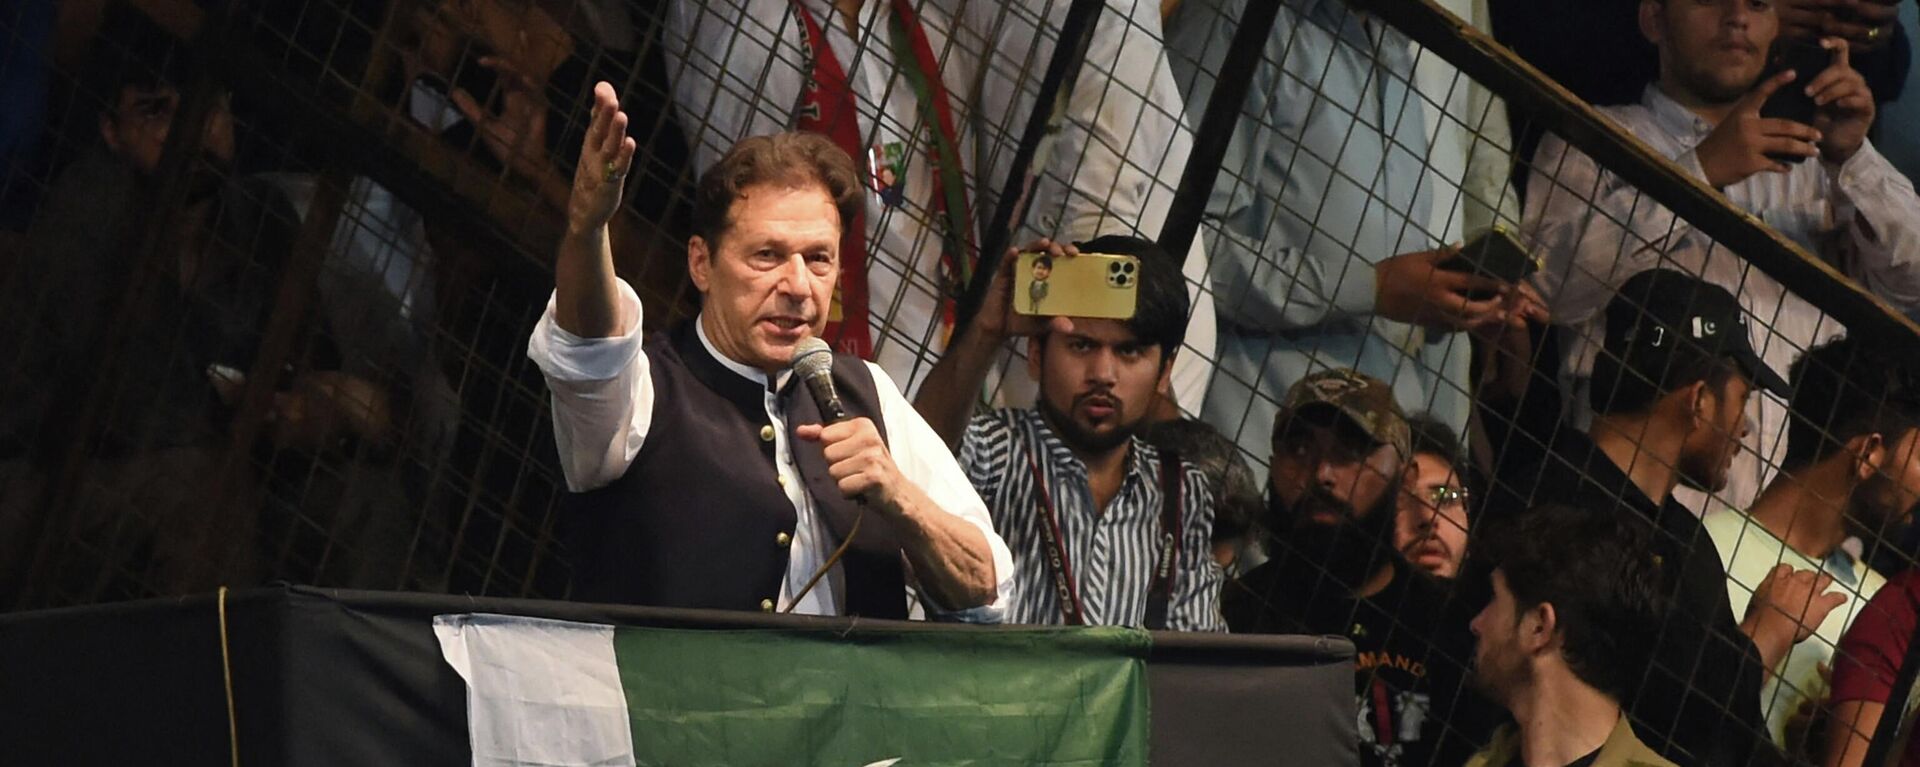 Pakistan's former Prime Minister and Pakistan Tehreek-e-Insaf party (PTI) chief Imran Khan, delivers a speech to his supporters during a rally celebrate the 75th anniversary of Pakistan's independence day in Lahore on August 13, 2022. - Sputnik International, 1920, 21.08.2022